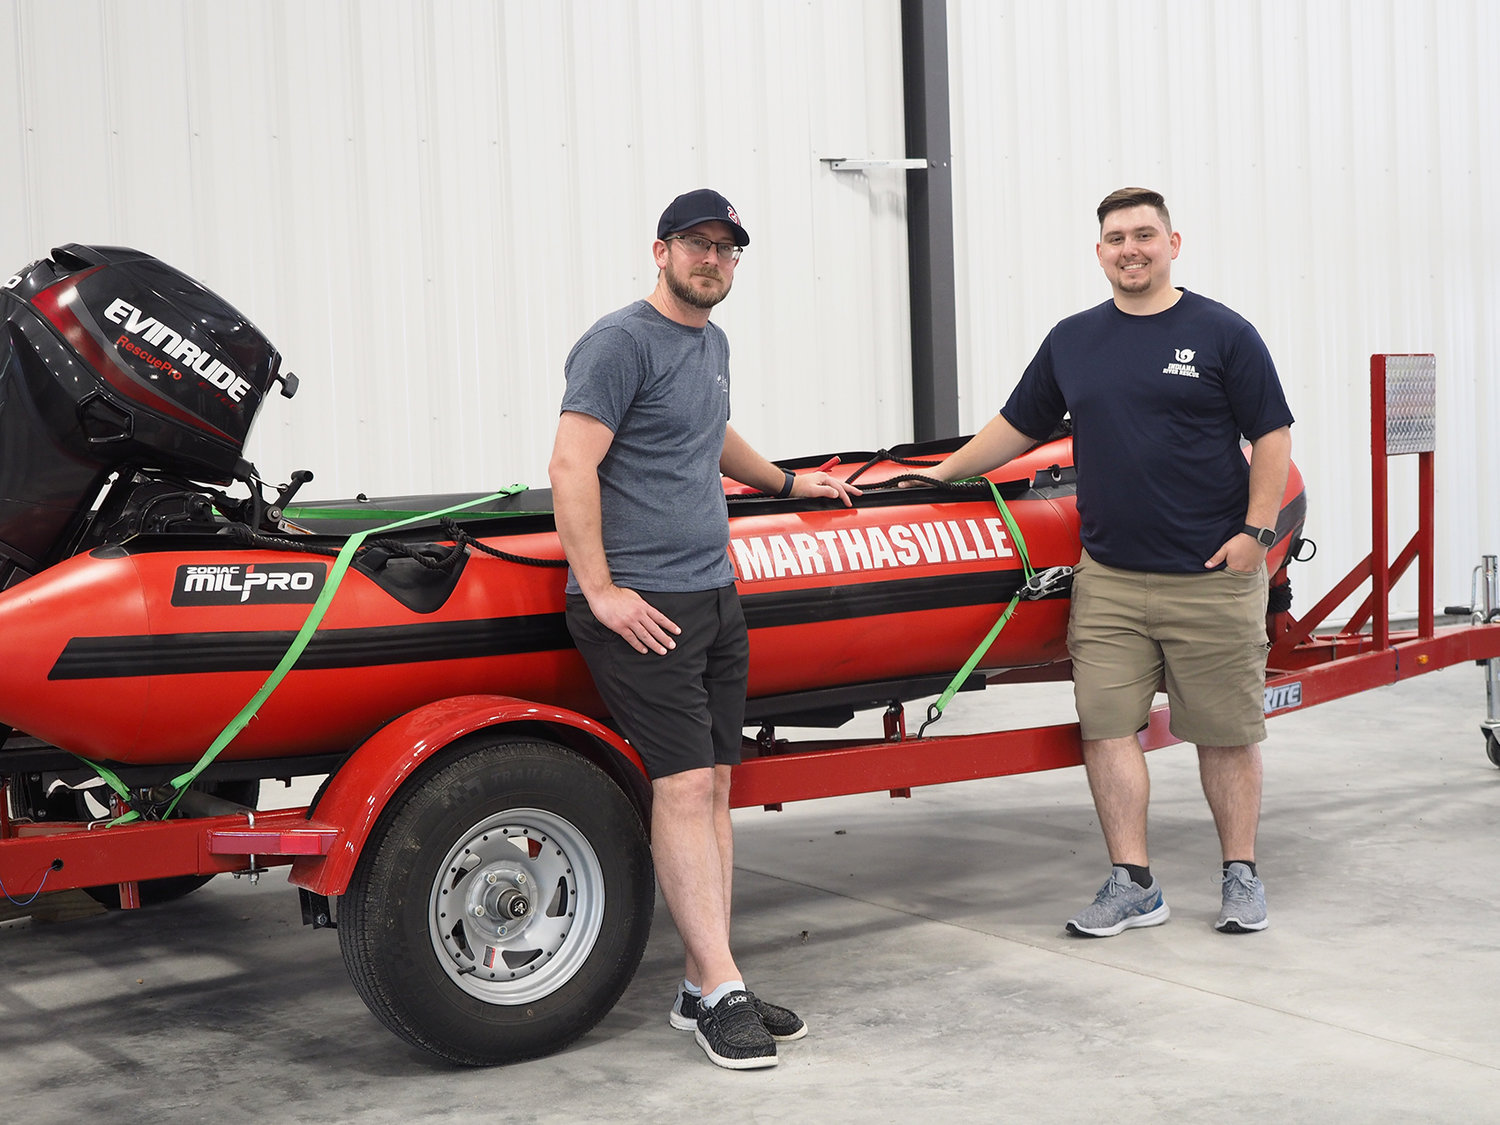 SWIFTWATER CERTIFIED — Marthasville Fire Captain Tony Timpe, left, and firefighter Jacob DeVore, recently earned their swiftwater technician certifications at the Indiana River Rescue School in South Bend, Indiana. For five days, the men trained in rescue skills, boat operation, rope skills, anchoring methods and problem-solving for making risky water rescues.